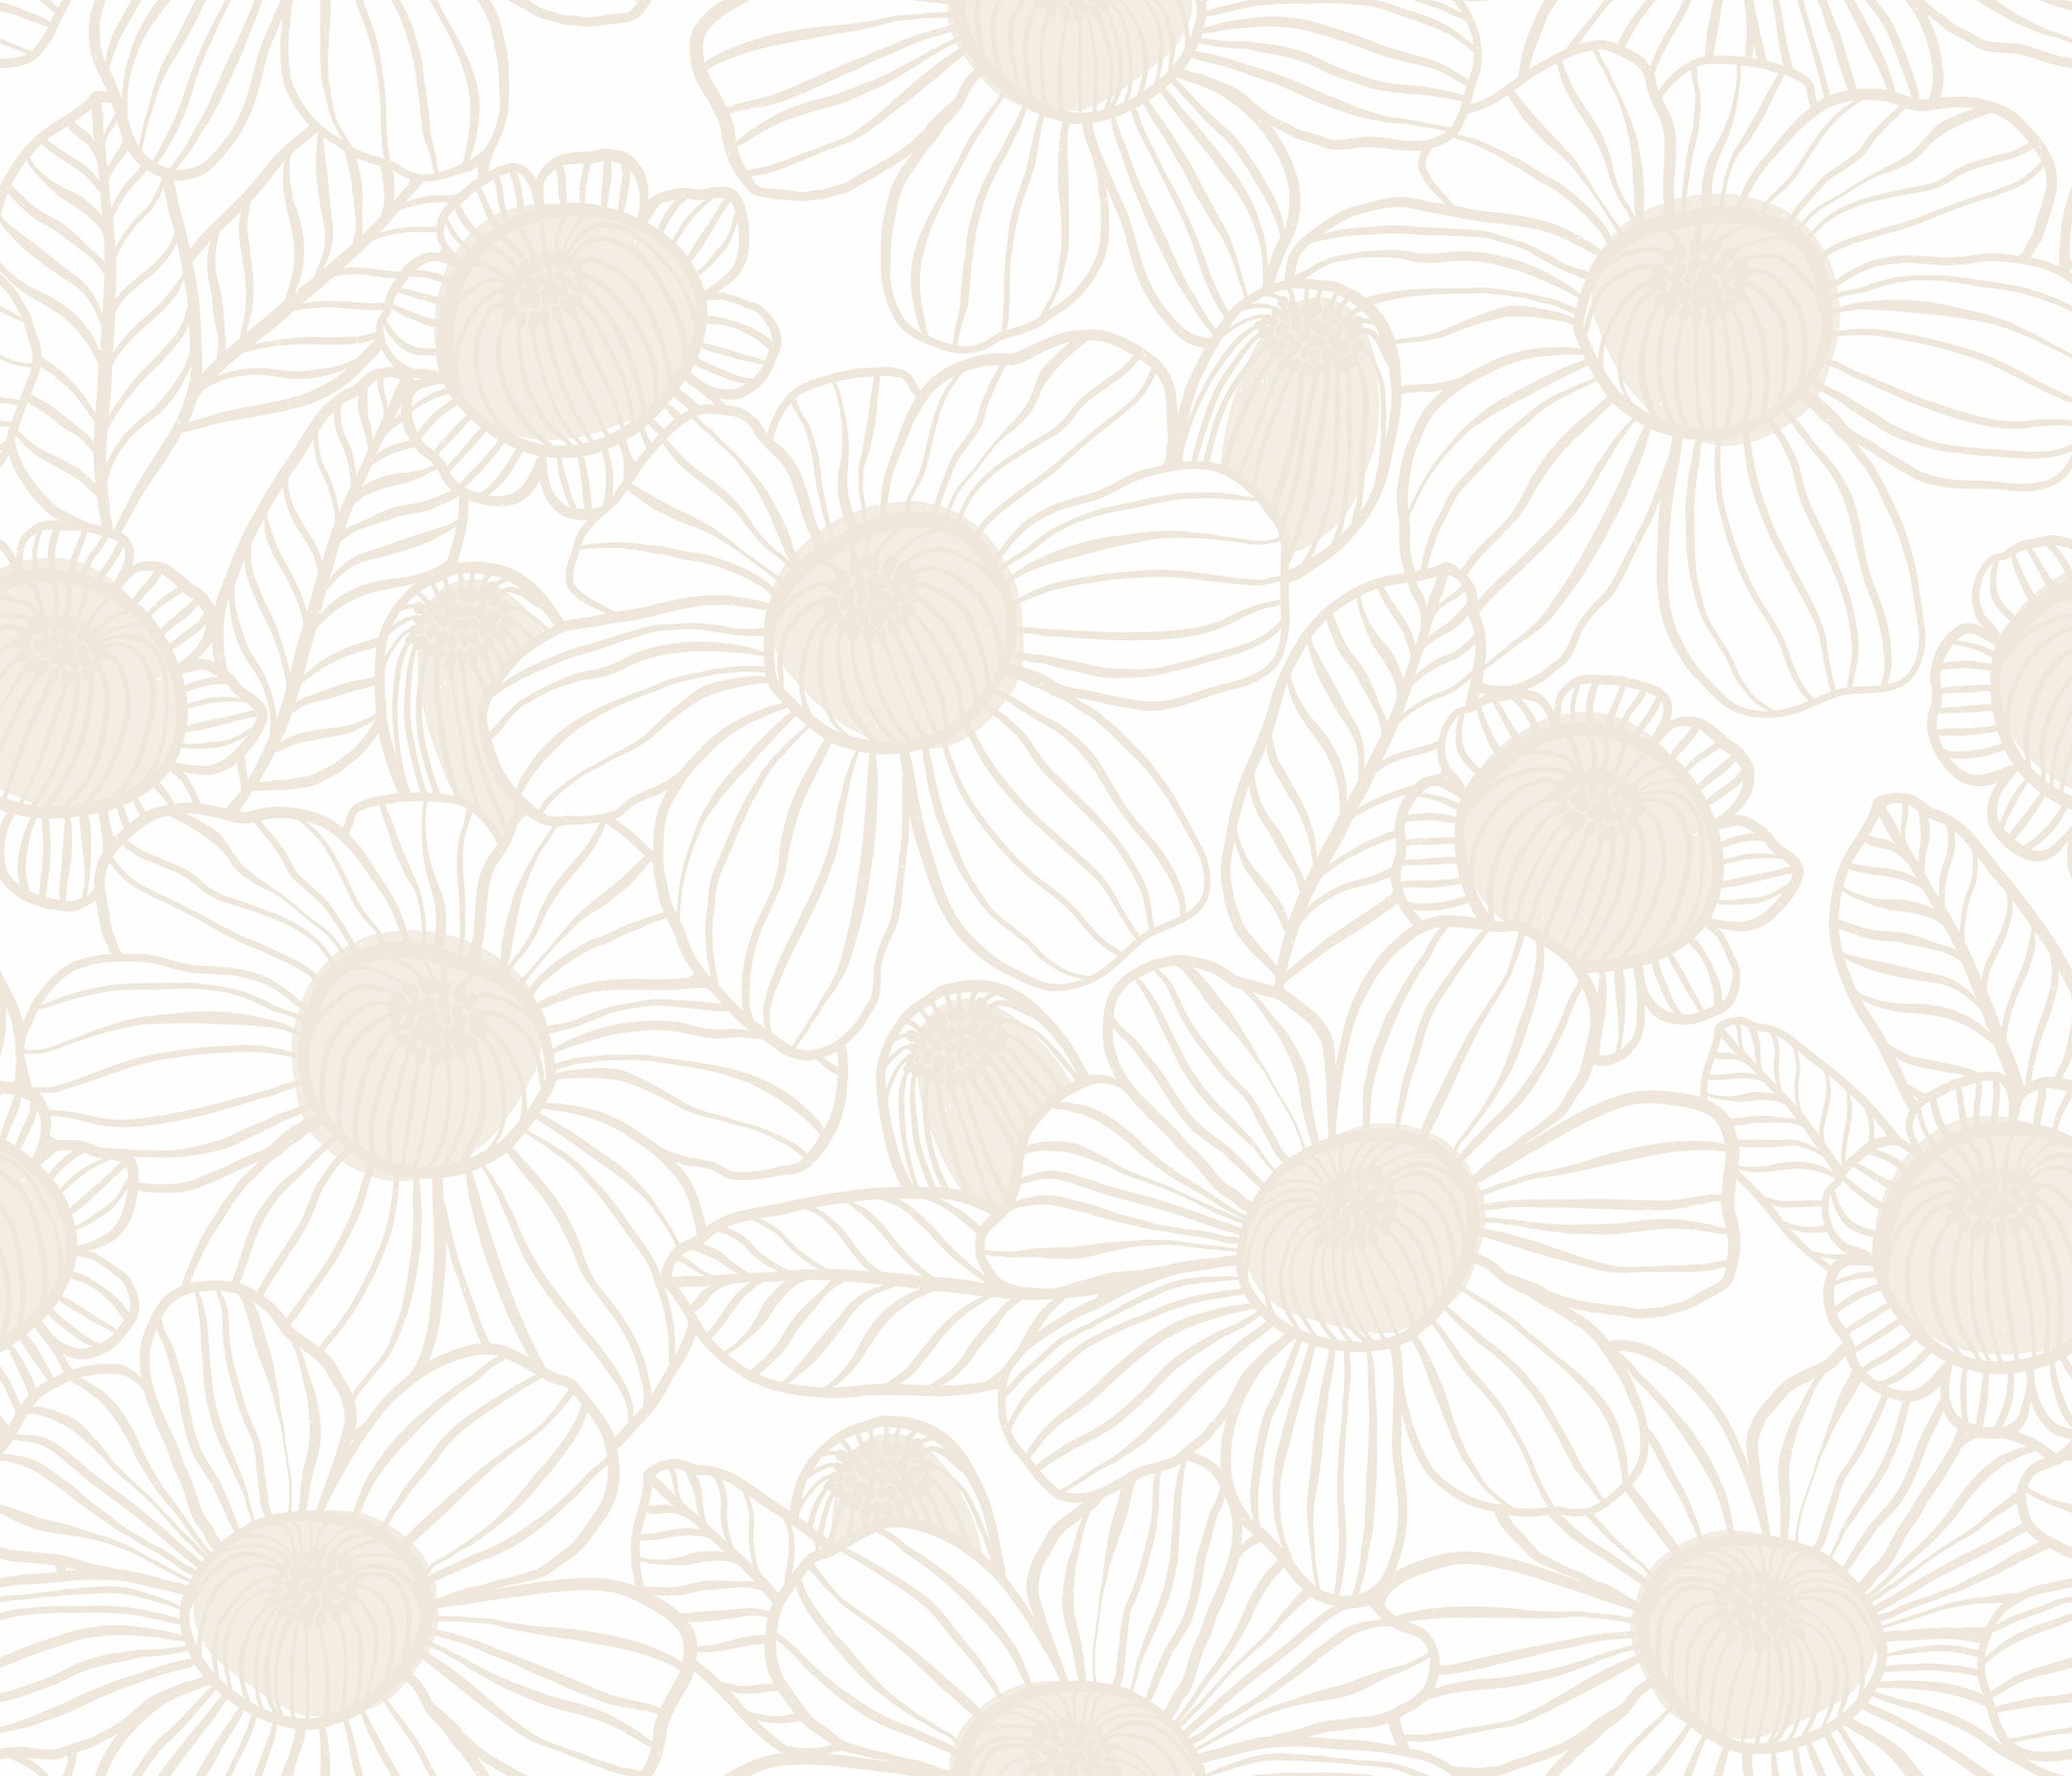 Close-up view of the Sandstone Silhouettes Wallpaper featuring an elegant pattern of large floral silhouettes in a soft sandstone hue. The minimalist design and subtle color palette create a calm and sophisticated atmosphere.